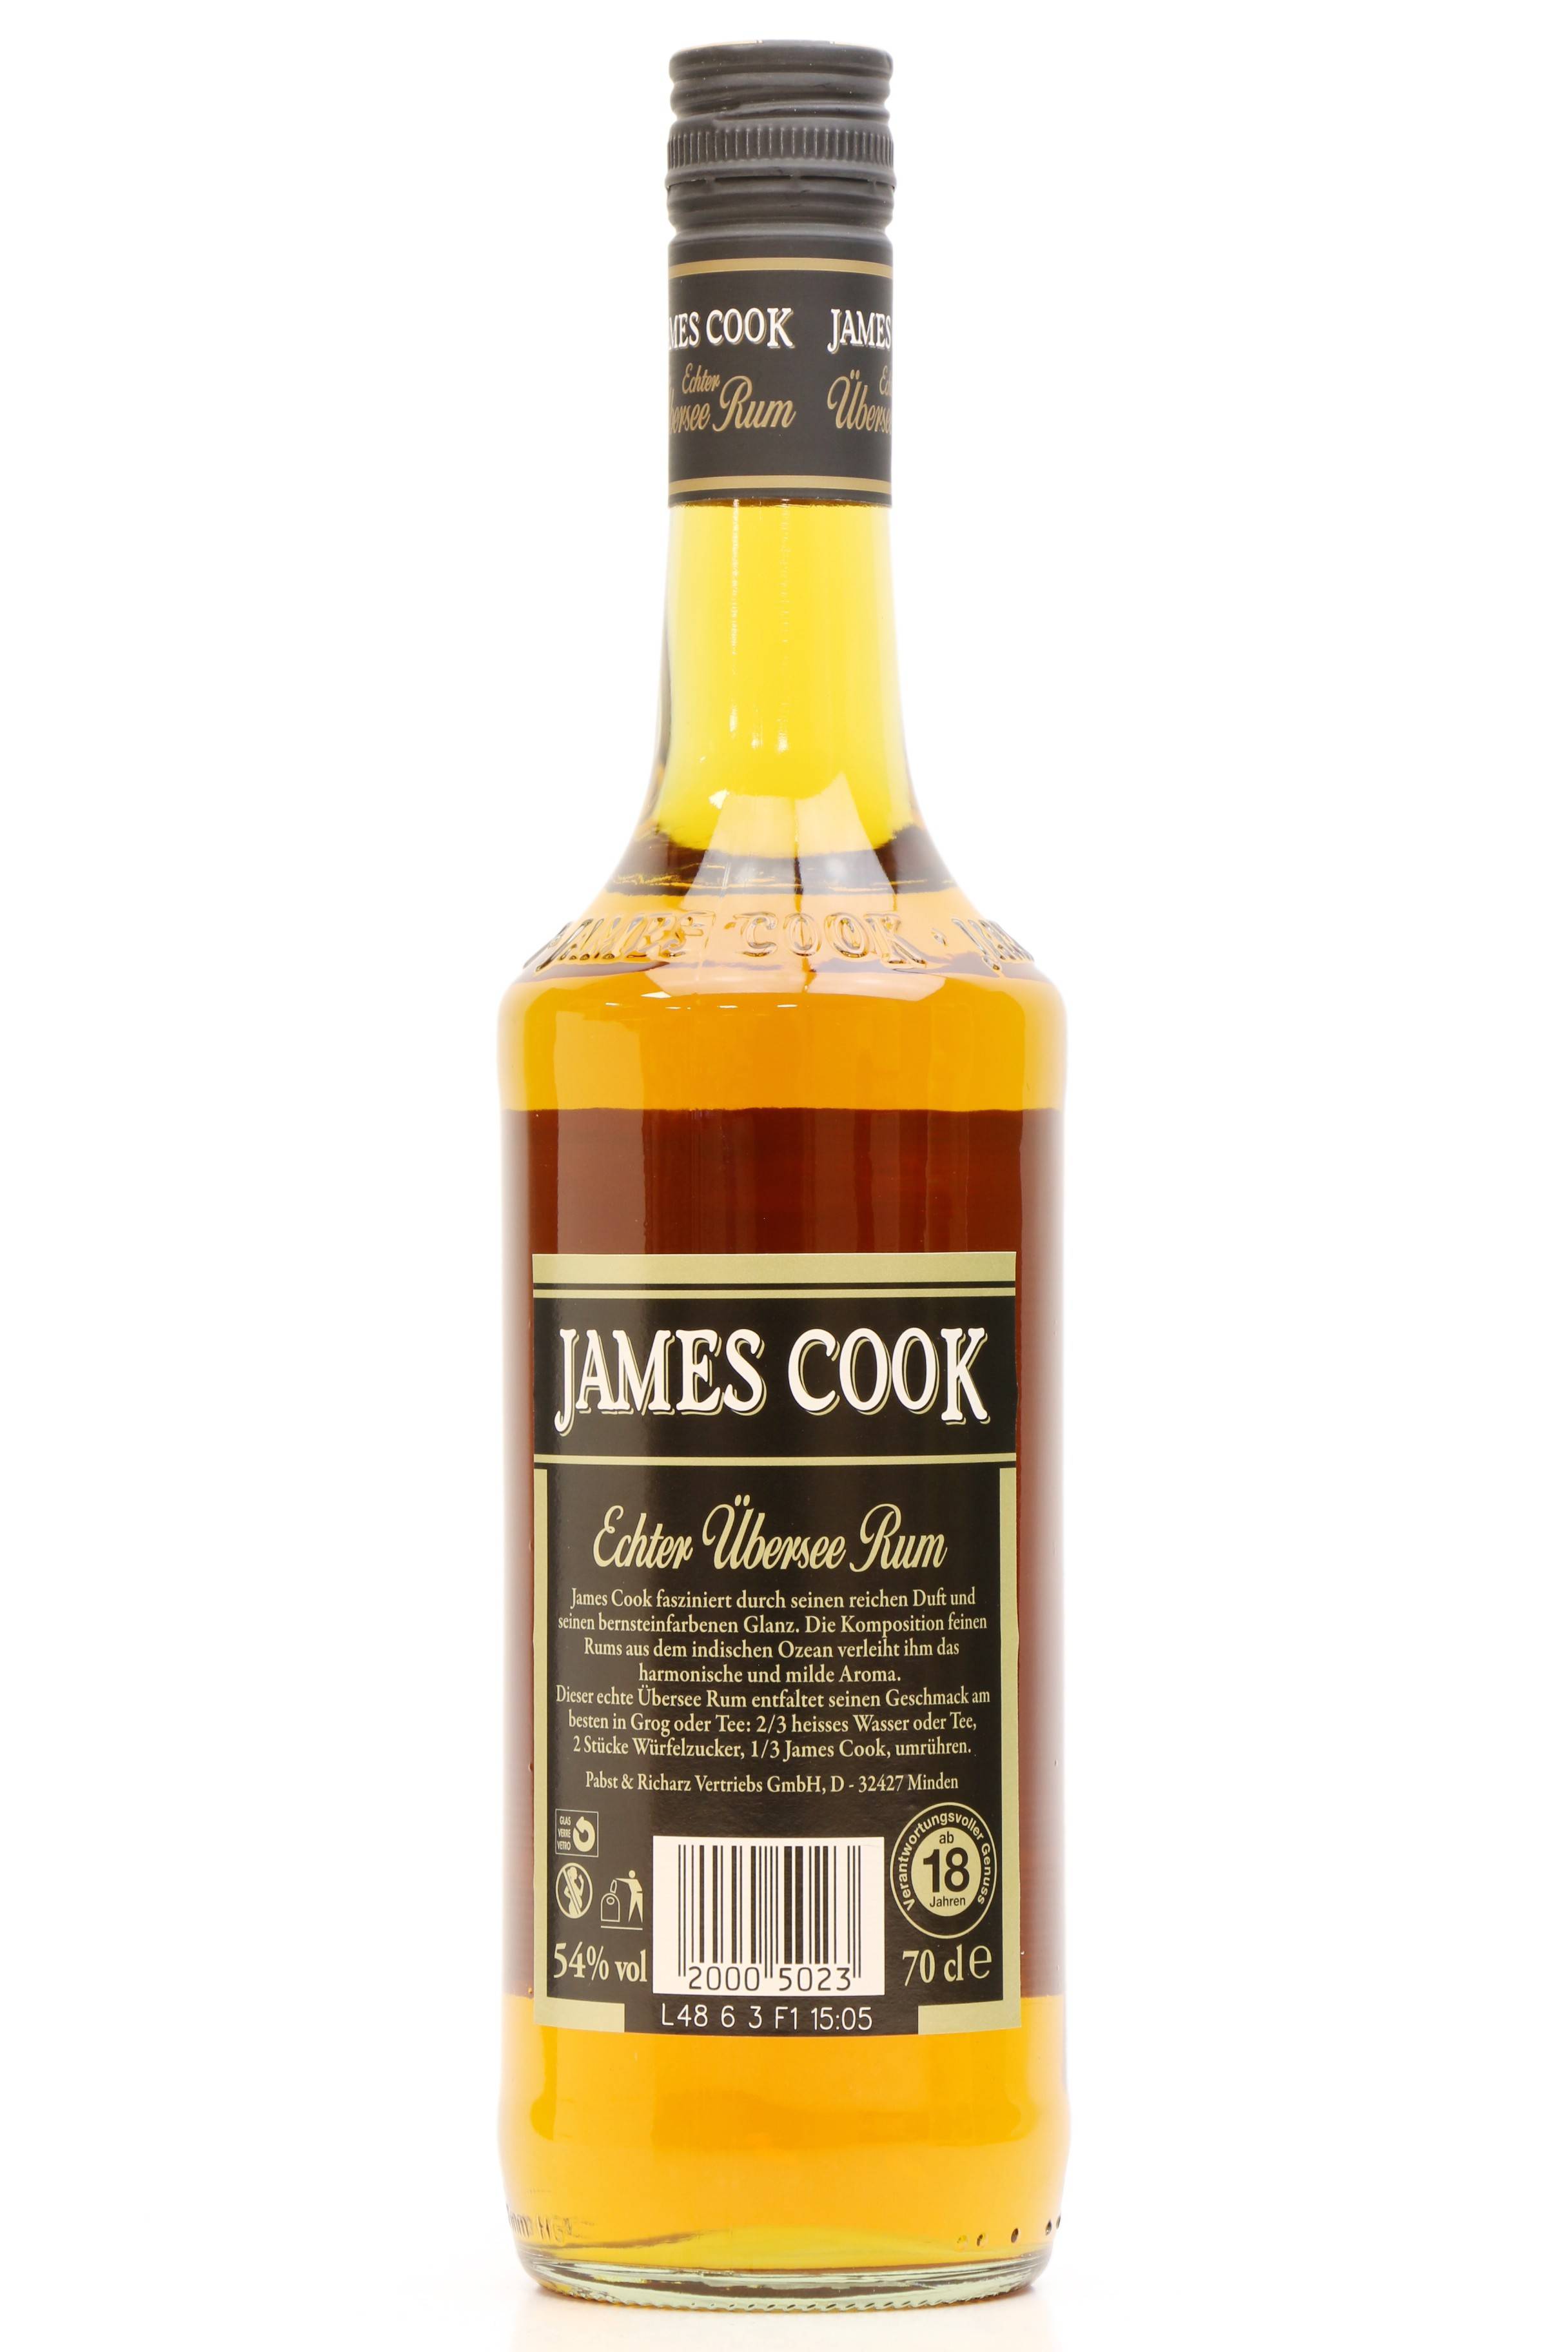 James Cook Echter Ubersee Rum (54%) - Just Whisky Auctions | Rum